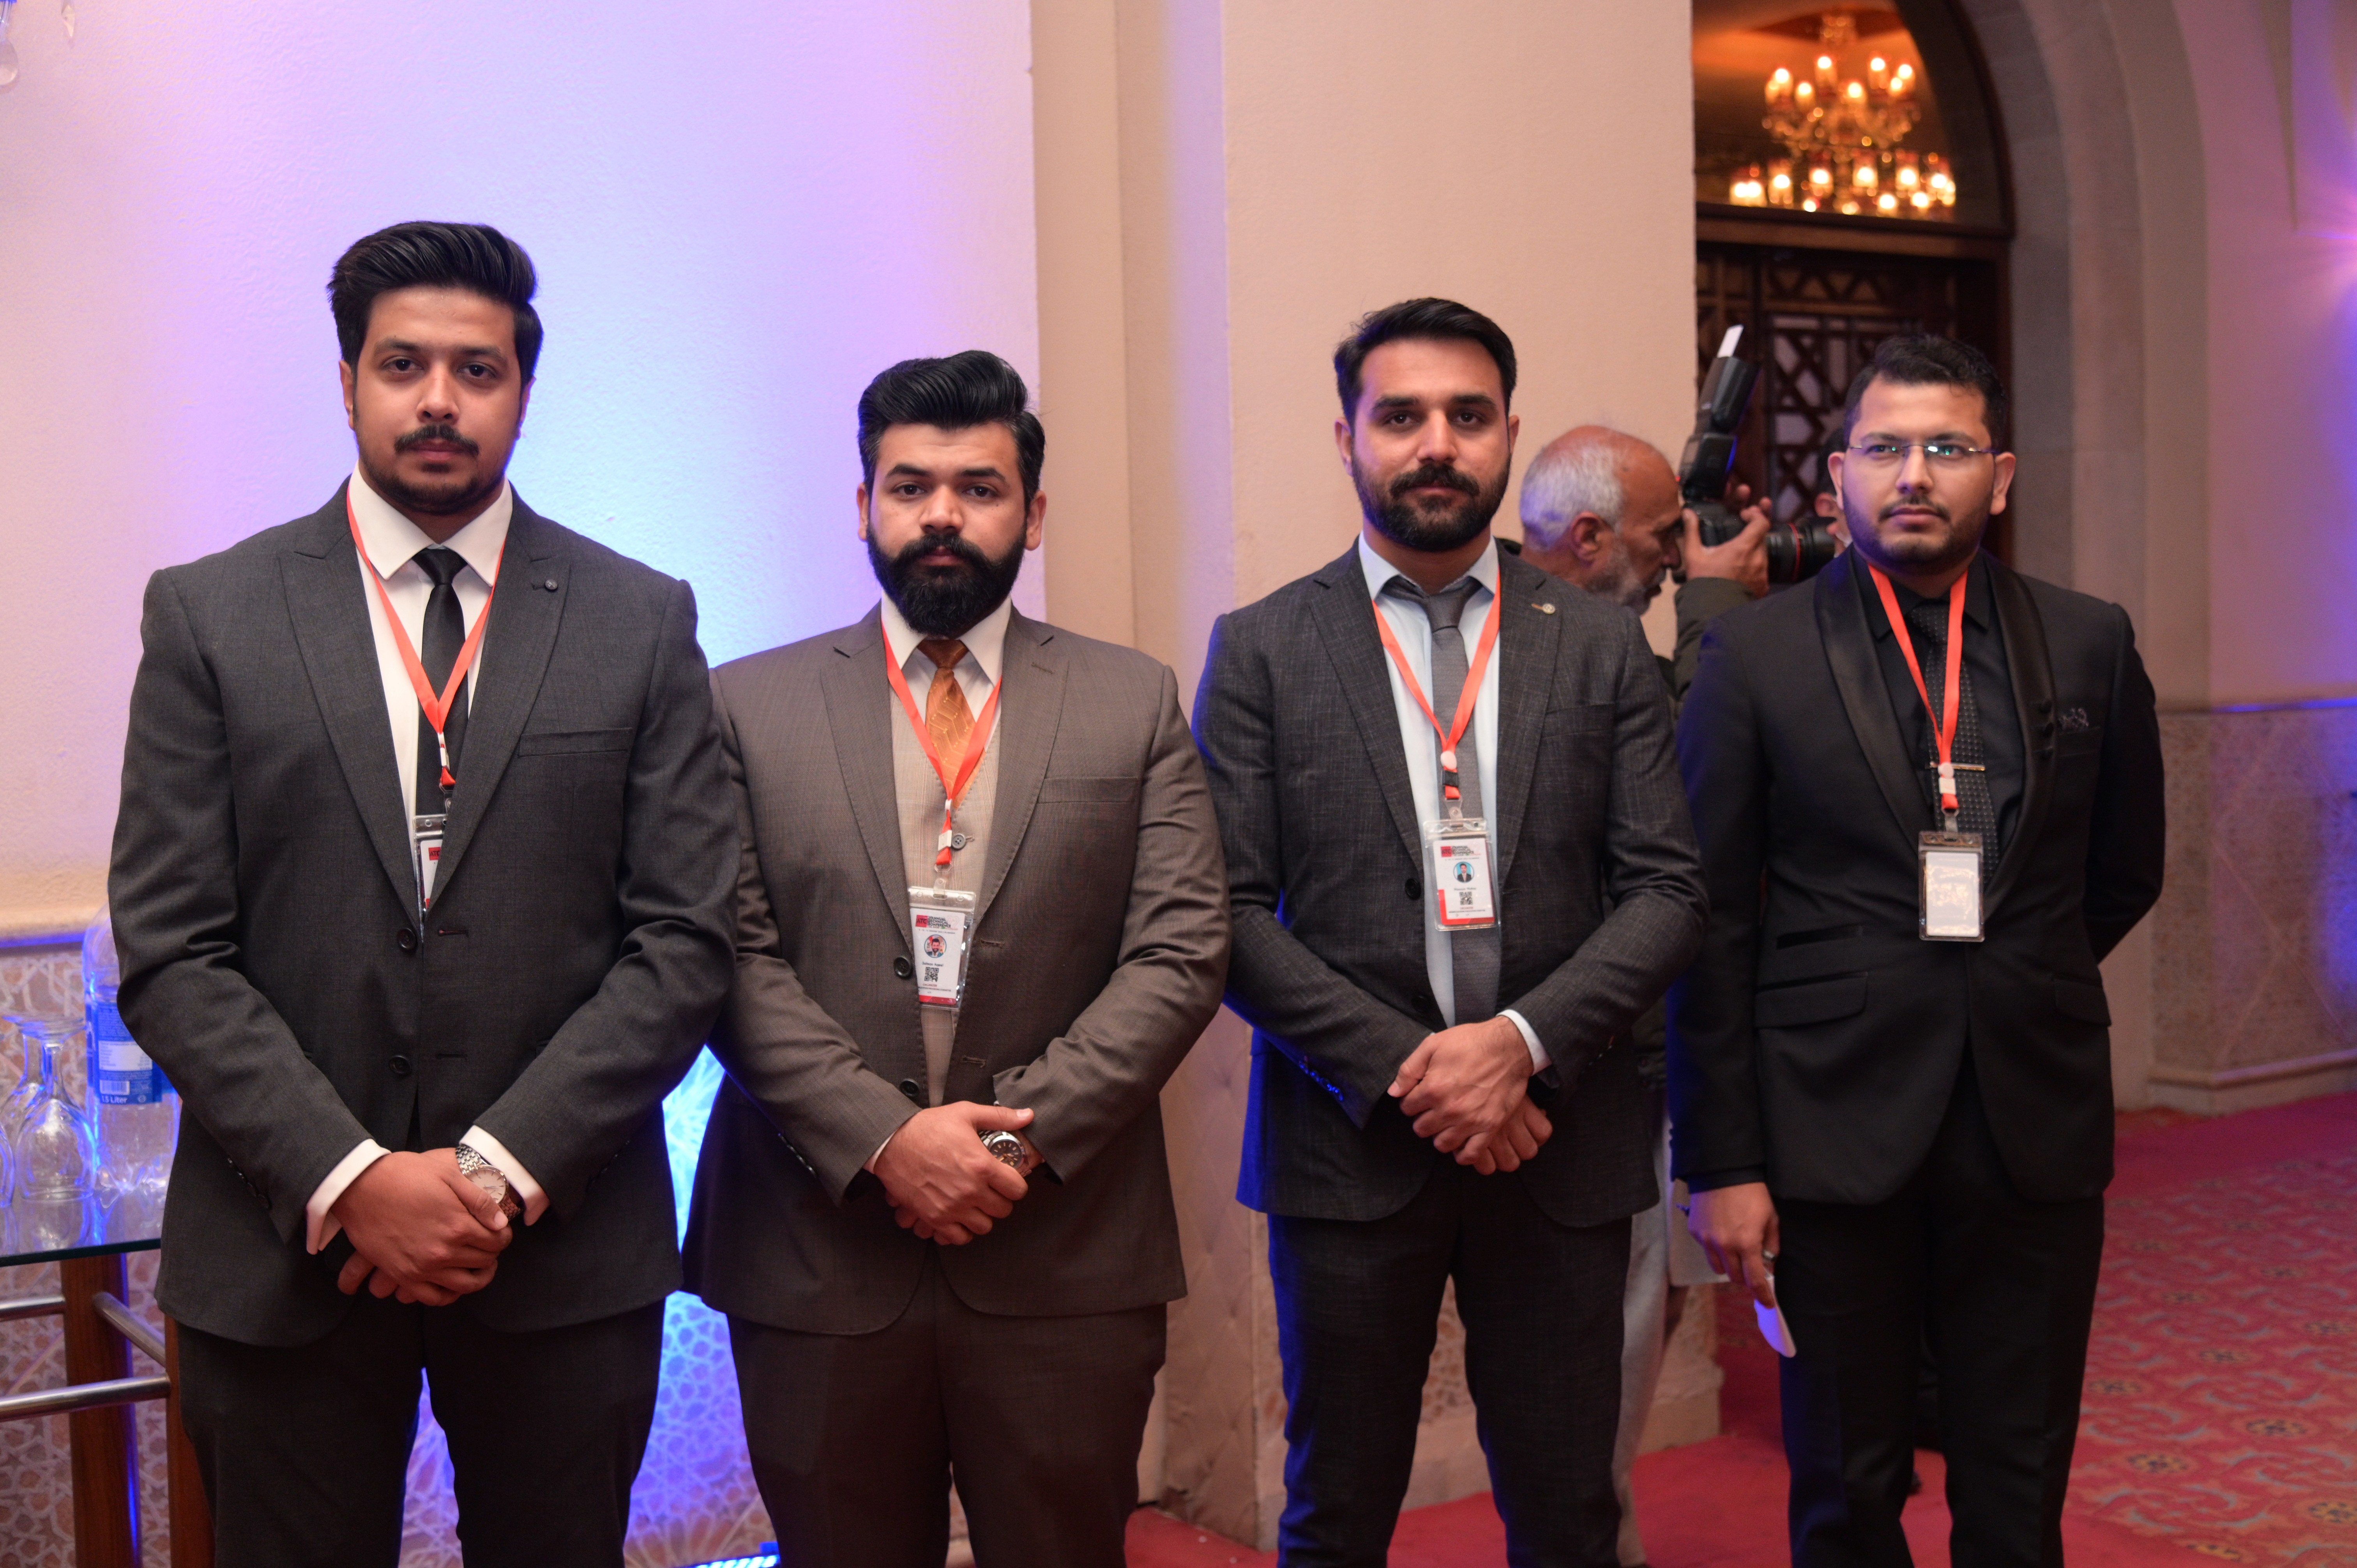 The organizers of the event at ATC conference